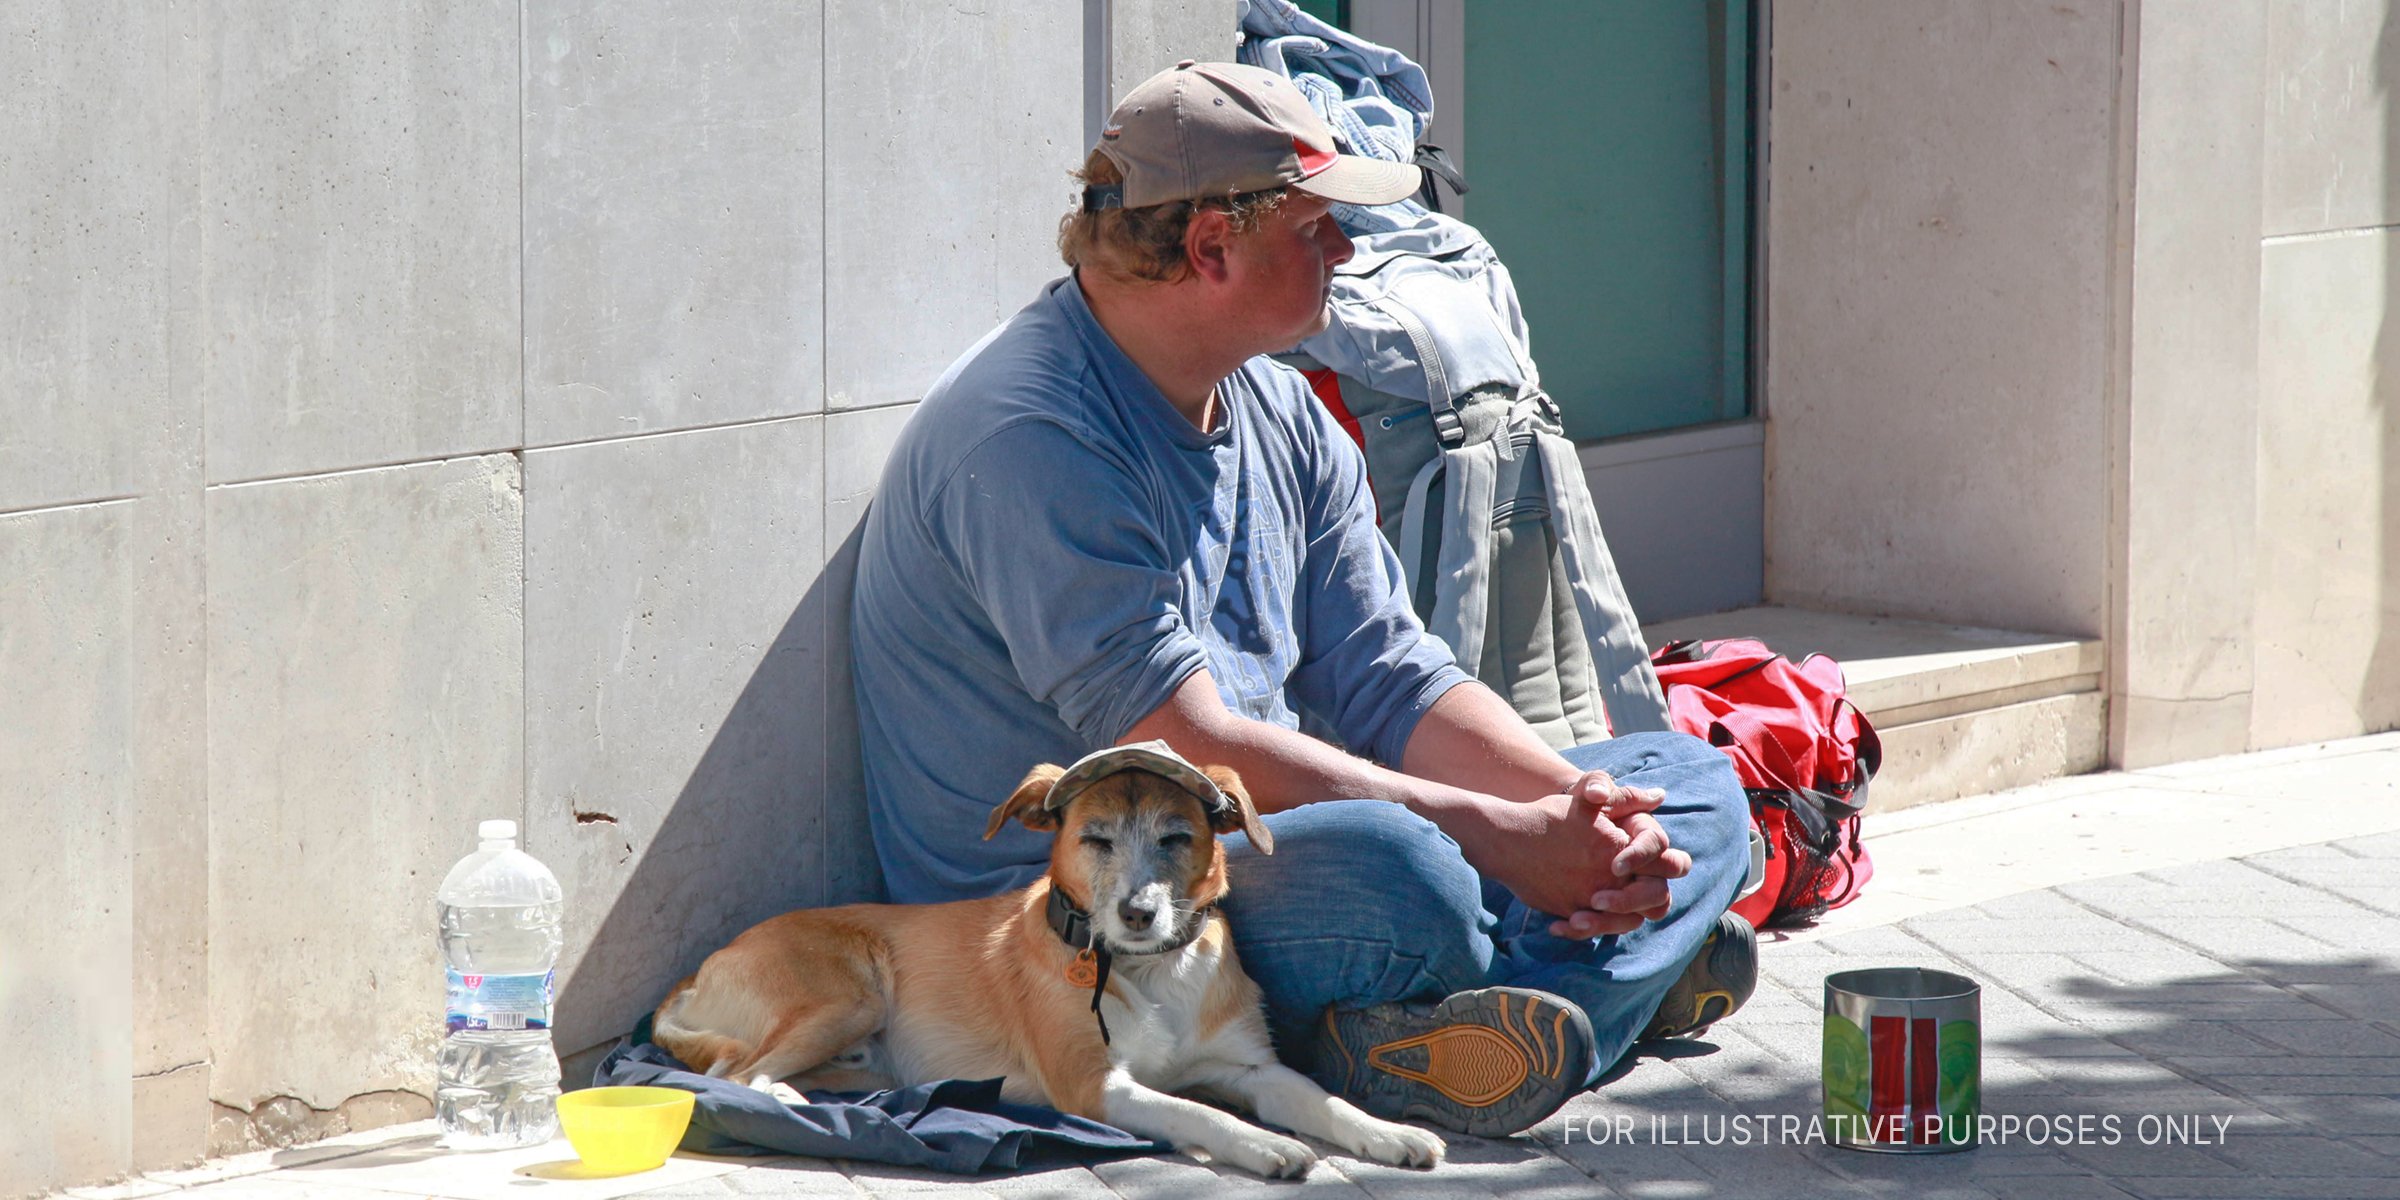 Beggar and dog on sitting on a pavement. | Source: Flickr / Mussi Katz (Public Domain)